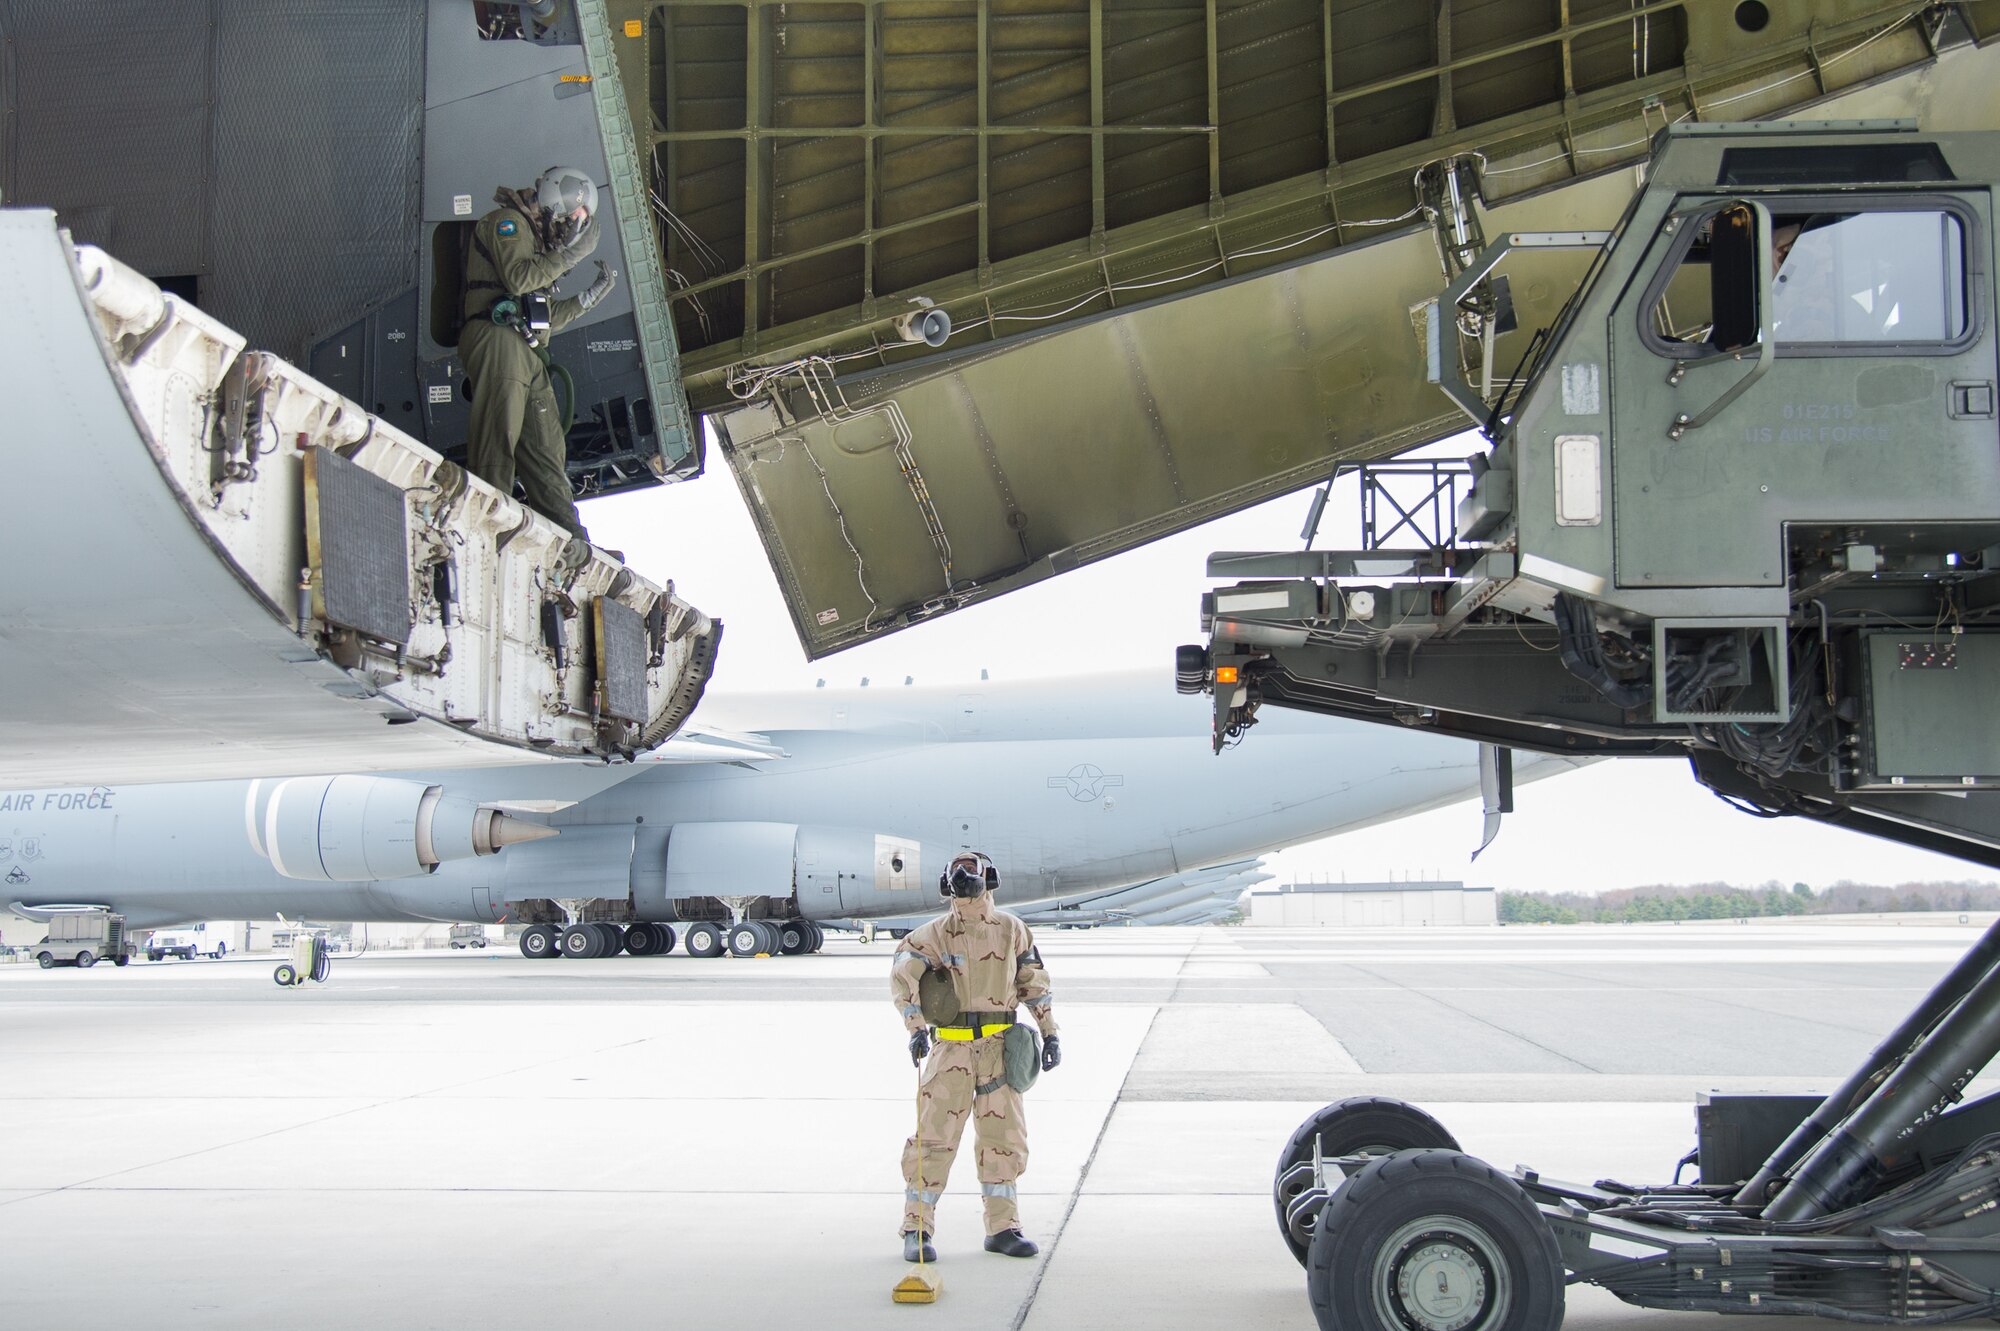 Team Dover Airmen offload a C-5M Super Galaxy wearing full MOPP gear during the 2018 Vengeant Eagle Exercise Feb. 22, 2018, at Dover Air Force Base, Del. One of the many tasks during the exercise was to land and offload cargo in a simulated contaminated environment. (U.S. Air Force photo by Mauricio Campino)